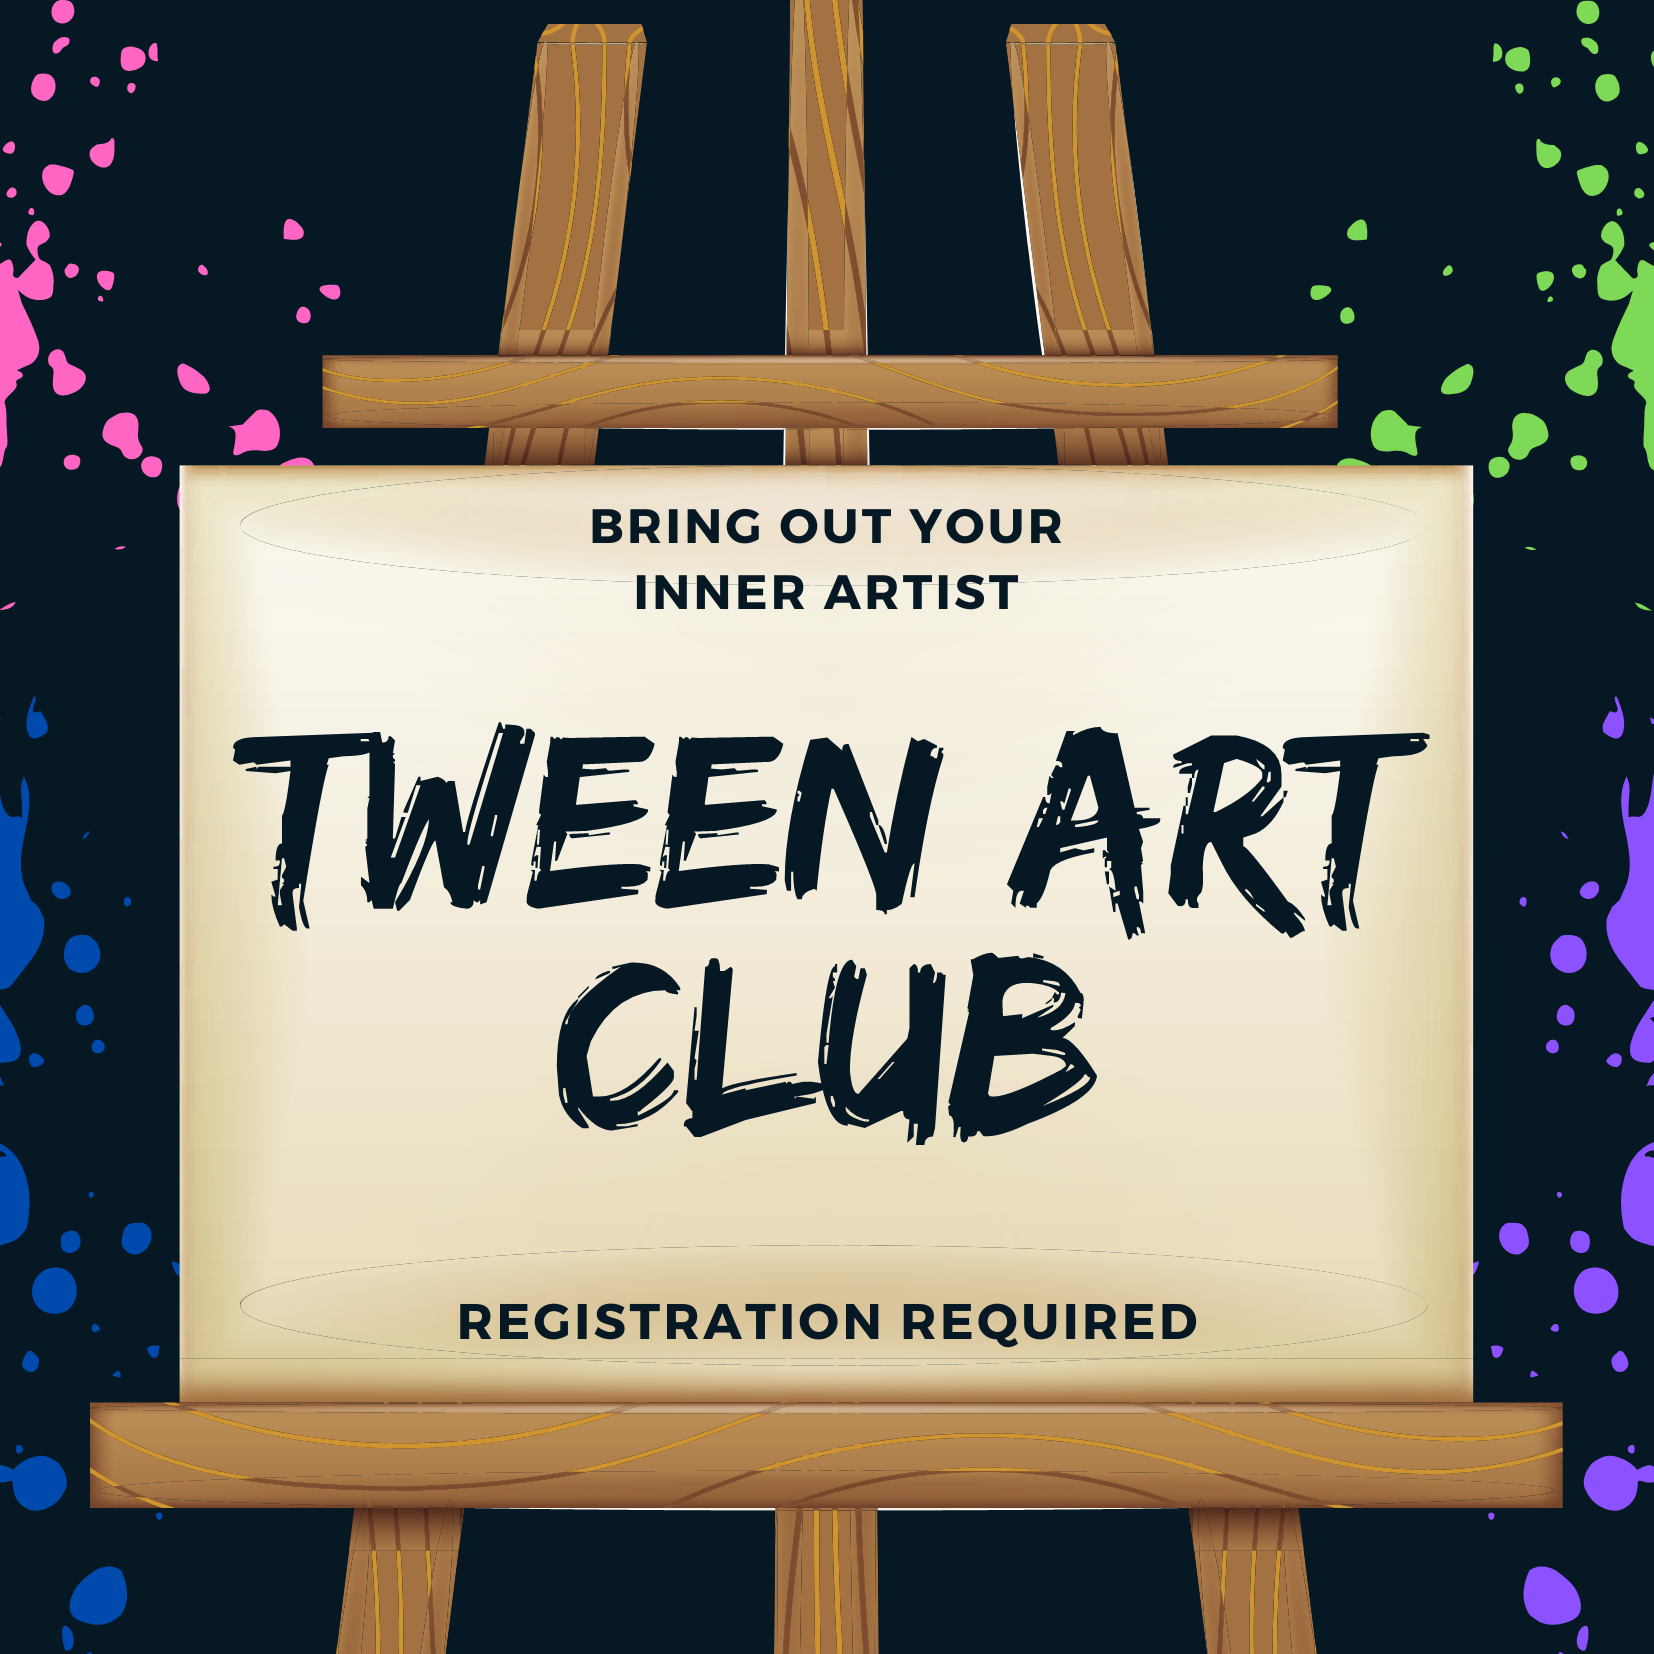 Black background with pink, purple, green, and blue paint splatters. Canvas on easel in middle, with "Release your inner artist Tween art club Registration Required" written